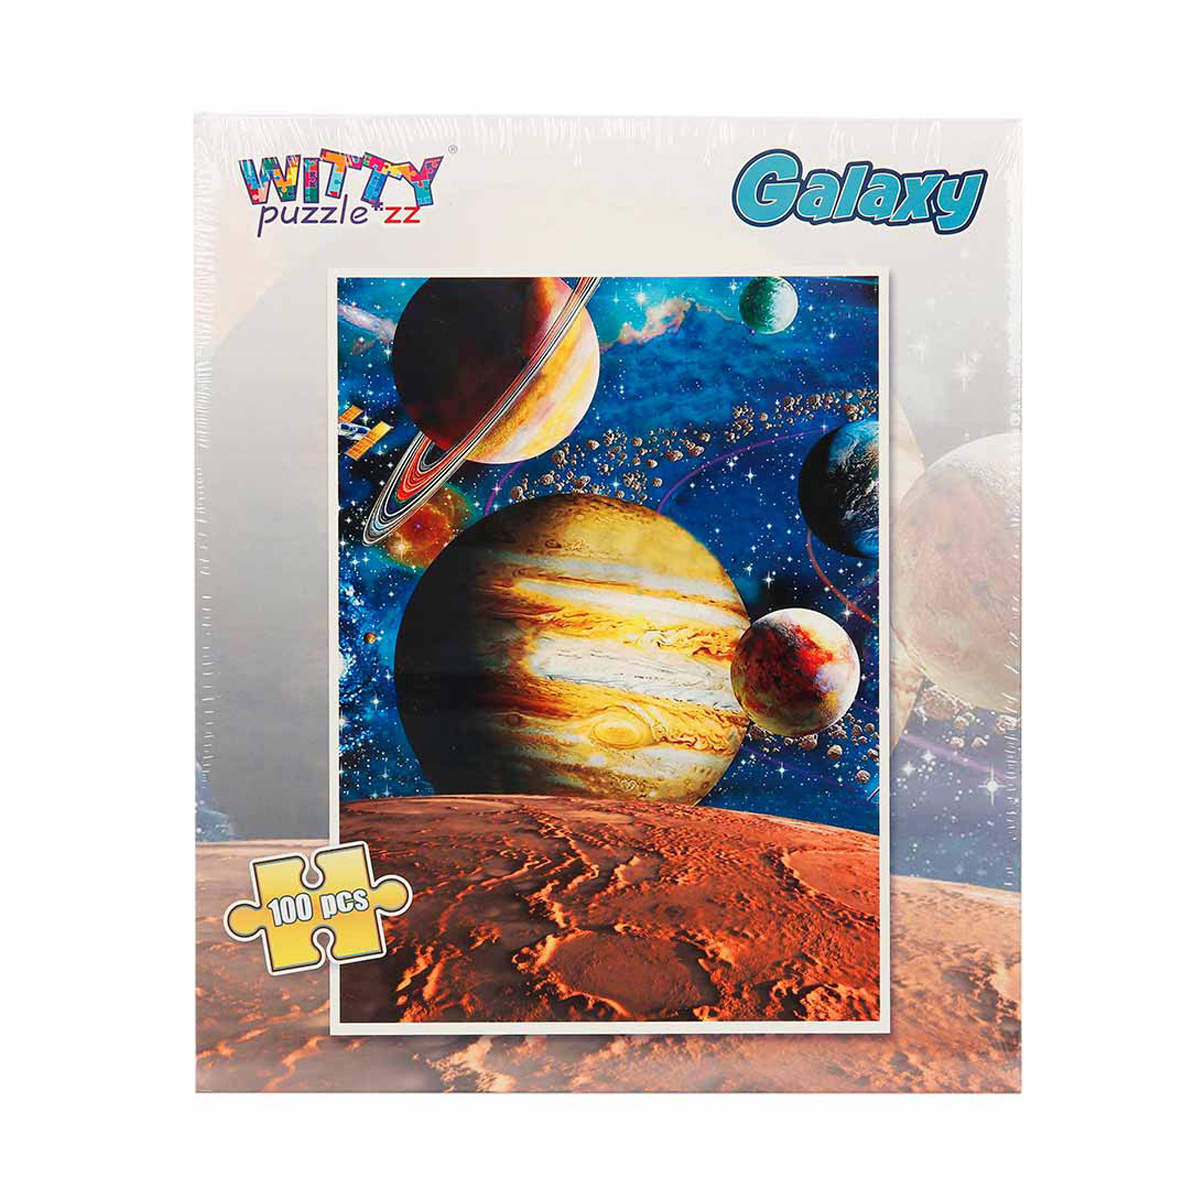 Puzzle witty puzzlezz, galaxia, 100 piese